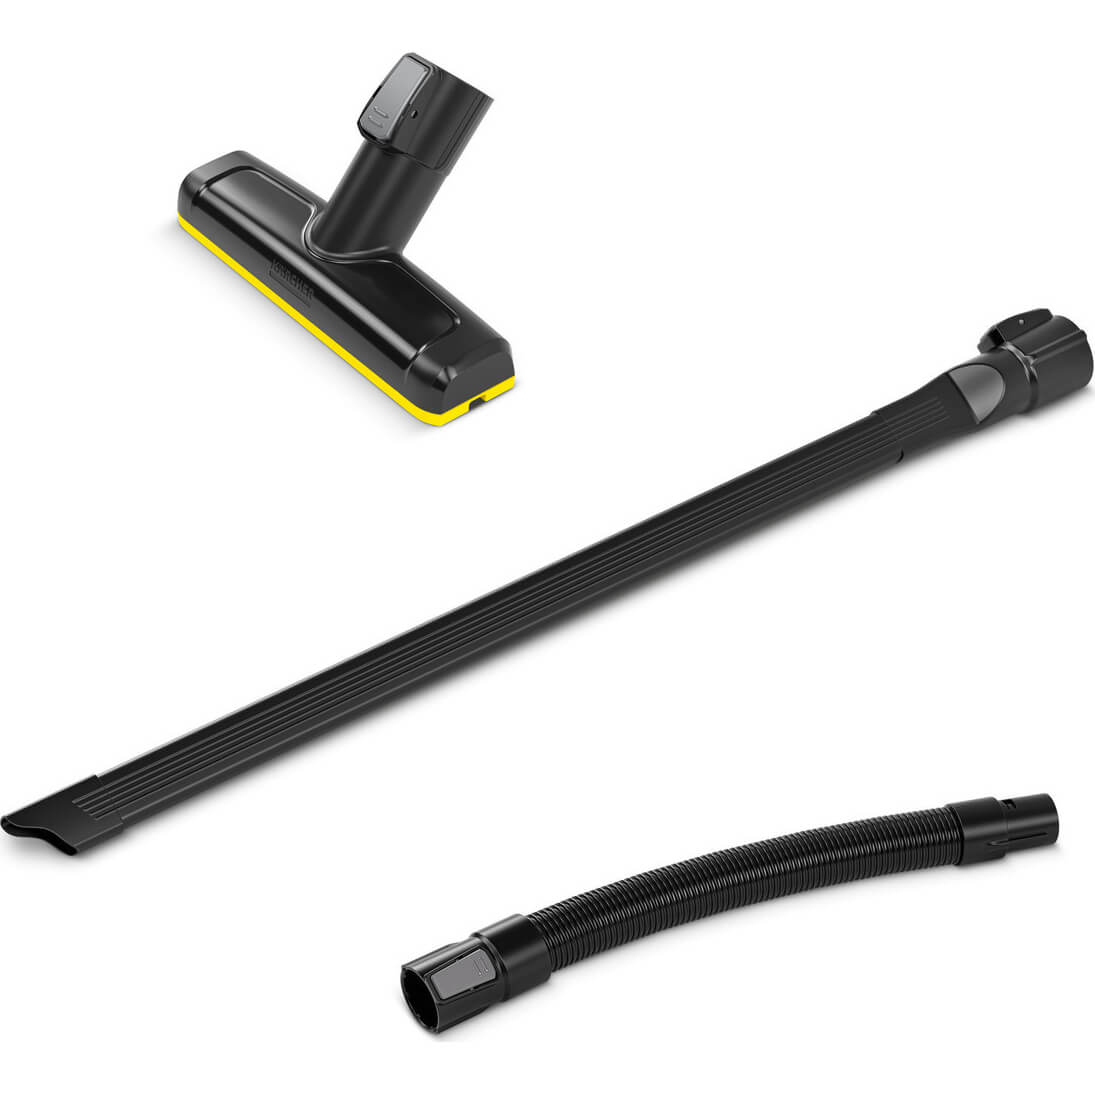 Karcher Car Kit for VC 4, 6 and 7 Cordless Vacuum Cleaners